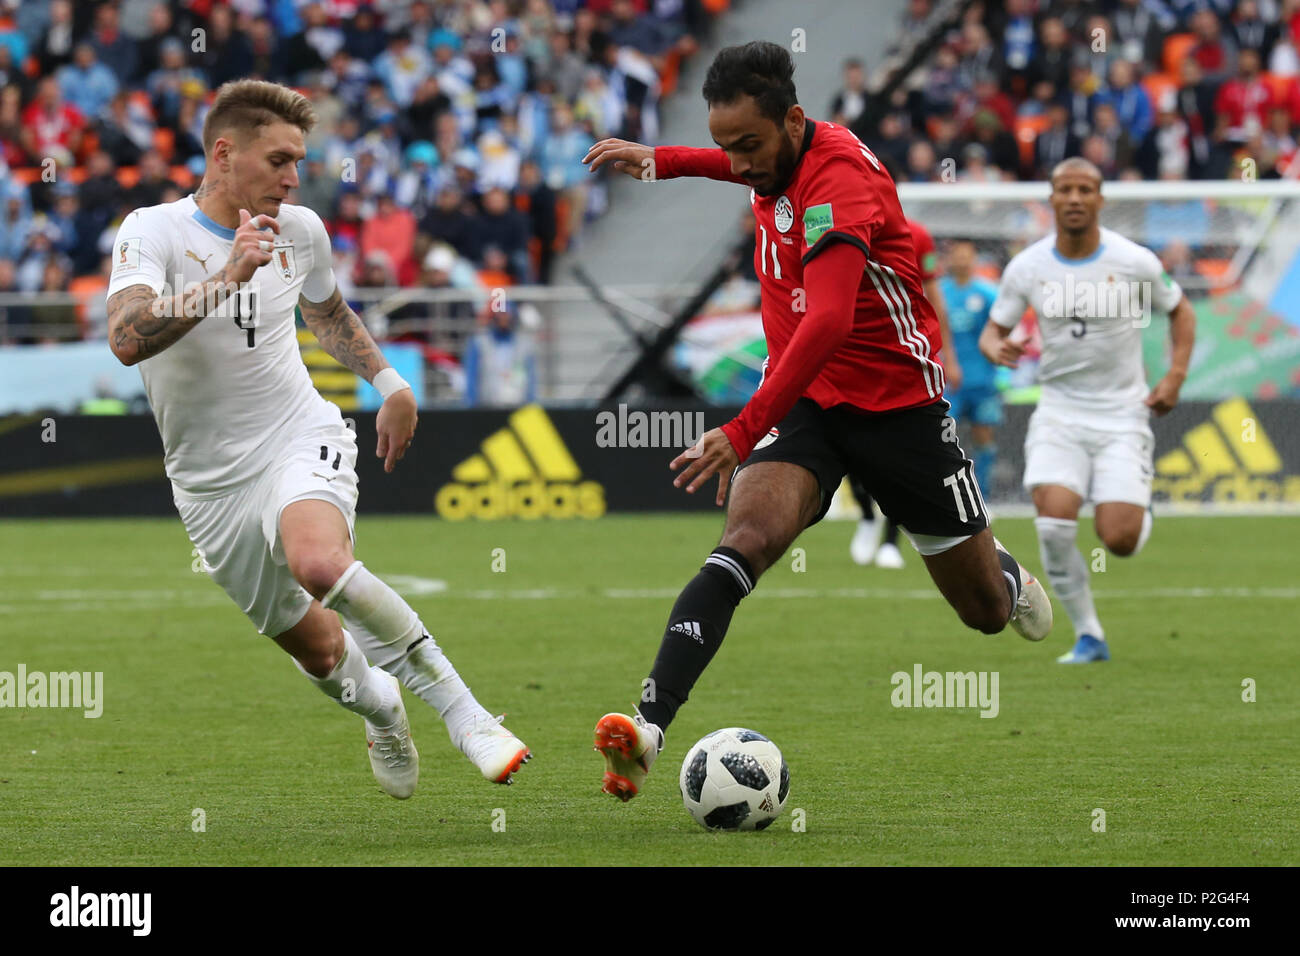 Yekaterinburg, Russia. 15th June, 2018. Uruguay's Guillermo Varela (L) battles for the ball with Egypt's Kahraba during the FIFA World Cup 2018 Group A soccer match between Egypt and Uruguay at the Ekaterinburg Arena in Yekaterinburg, Russia, 15 June 2018. Credit: Ahmed Ramadan/dpa/Alamy Live News Stock Photo